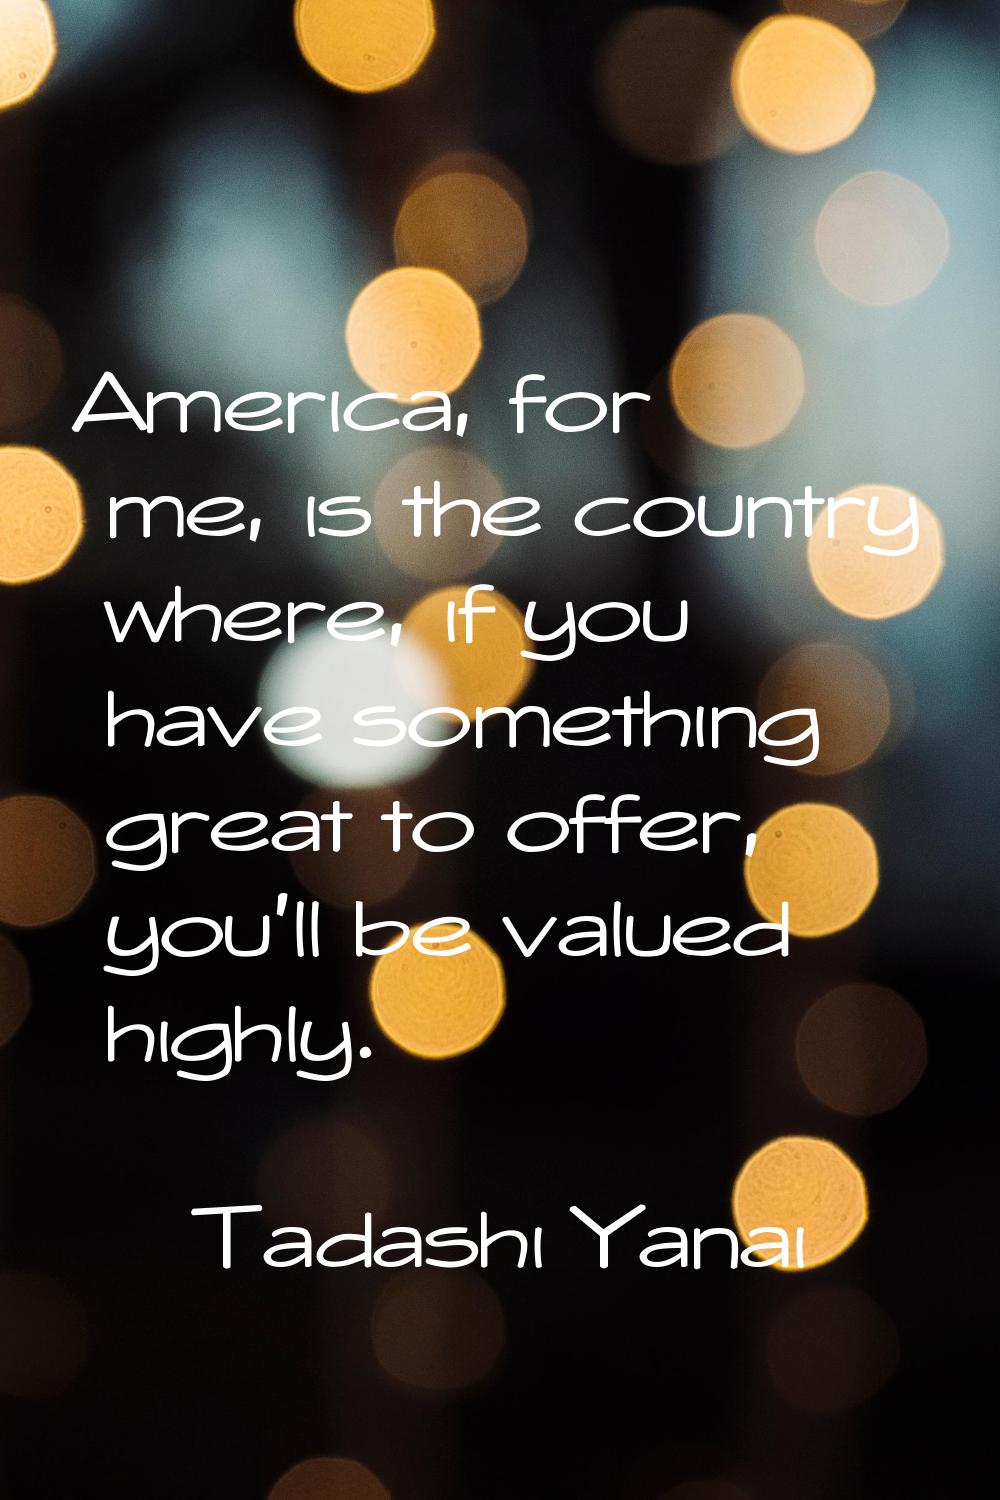 America, for me, is the country where, if you have something great to offer, you'll be valued highl